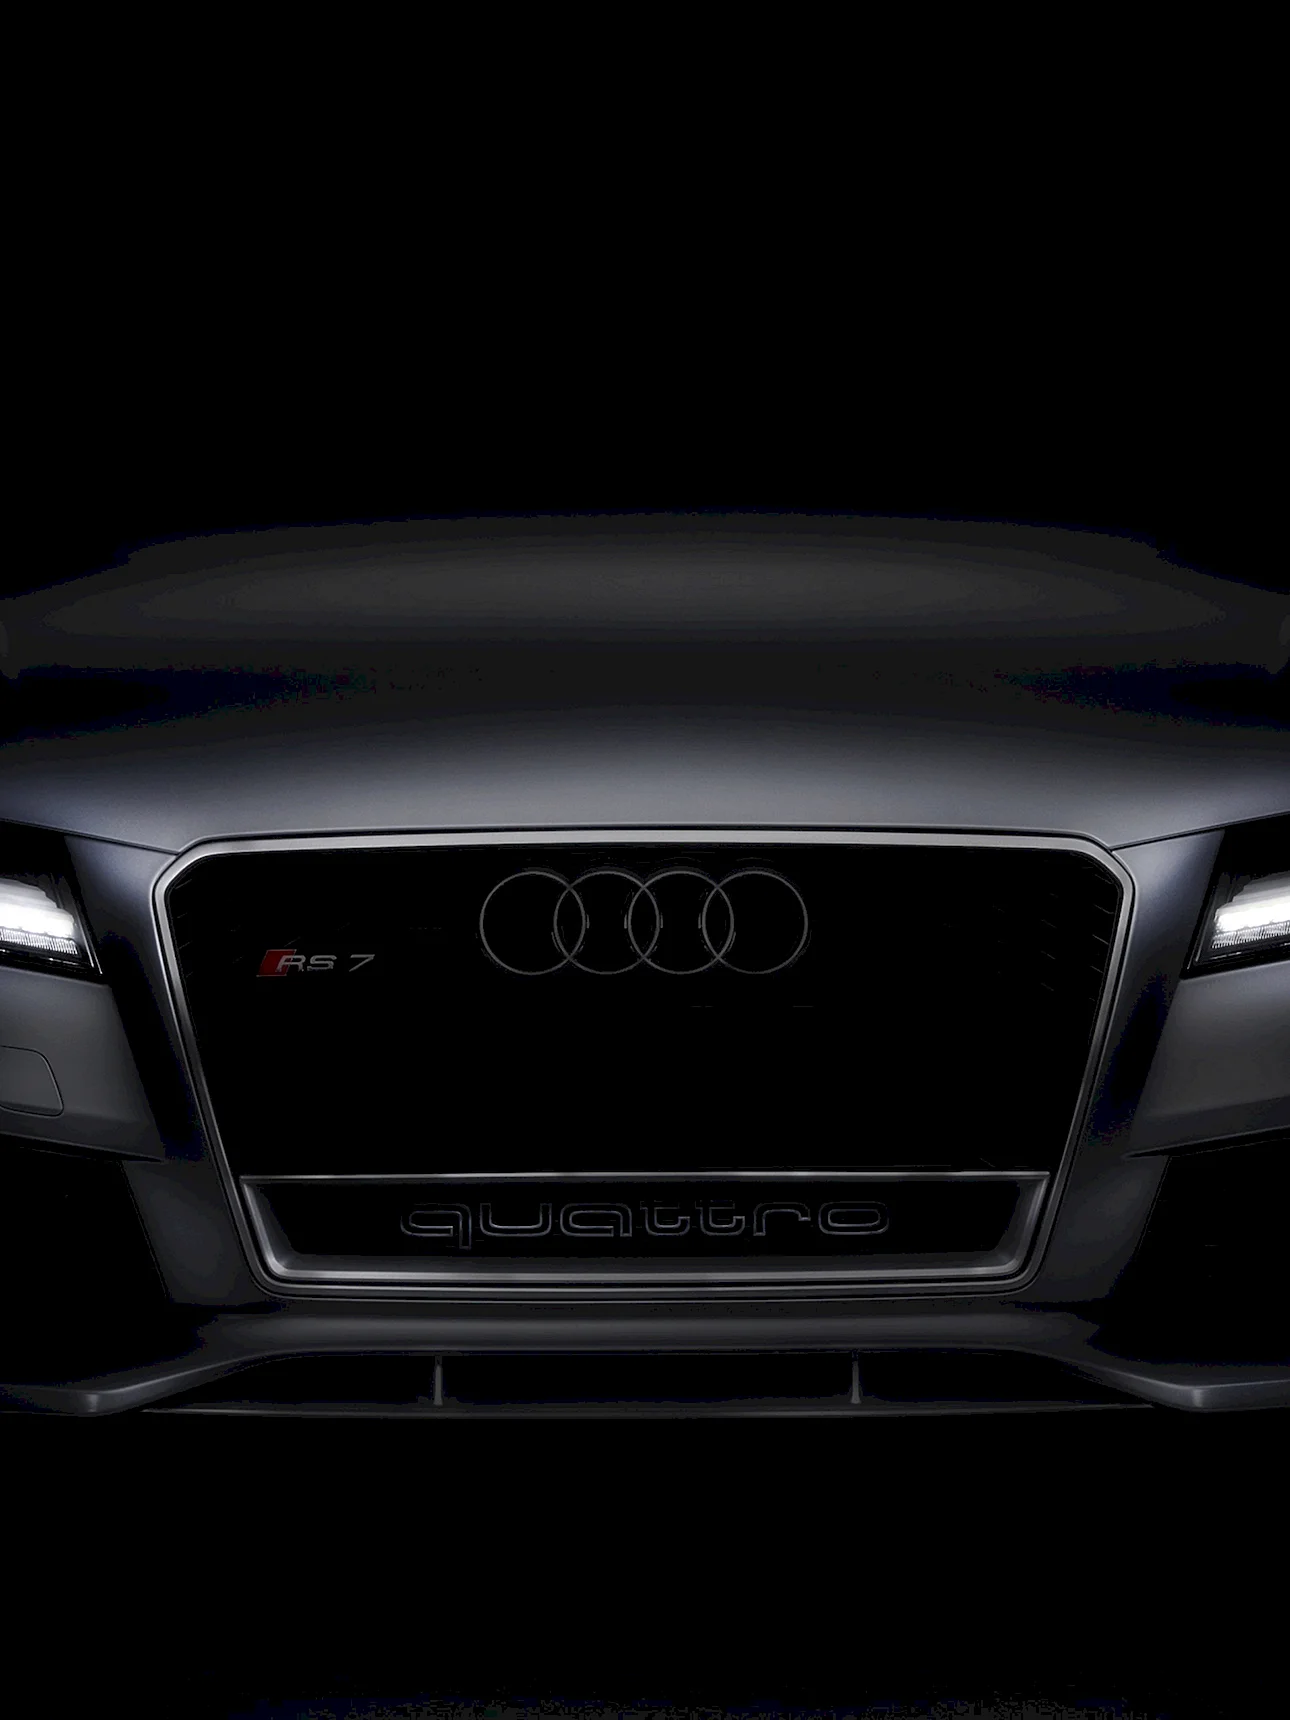 Audi For Mobile Wallpaper For iPhone